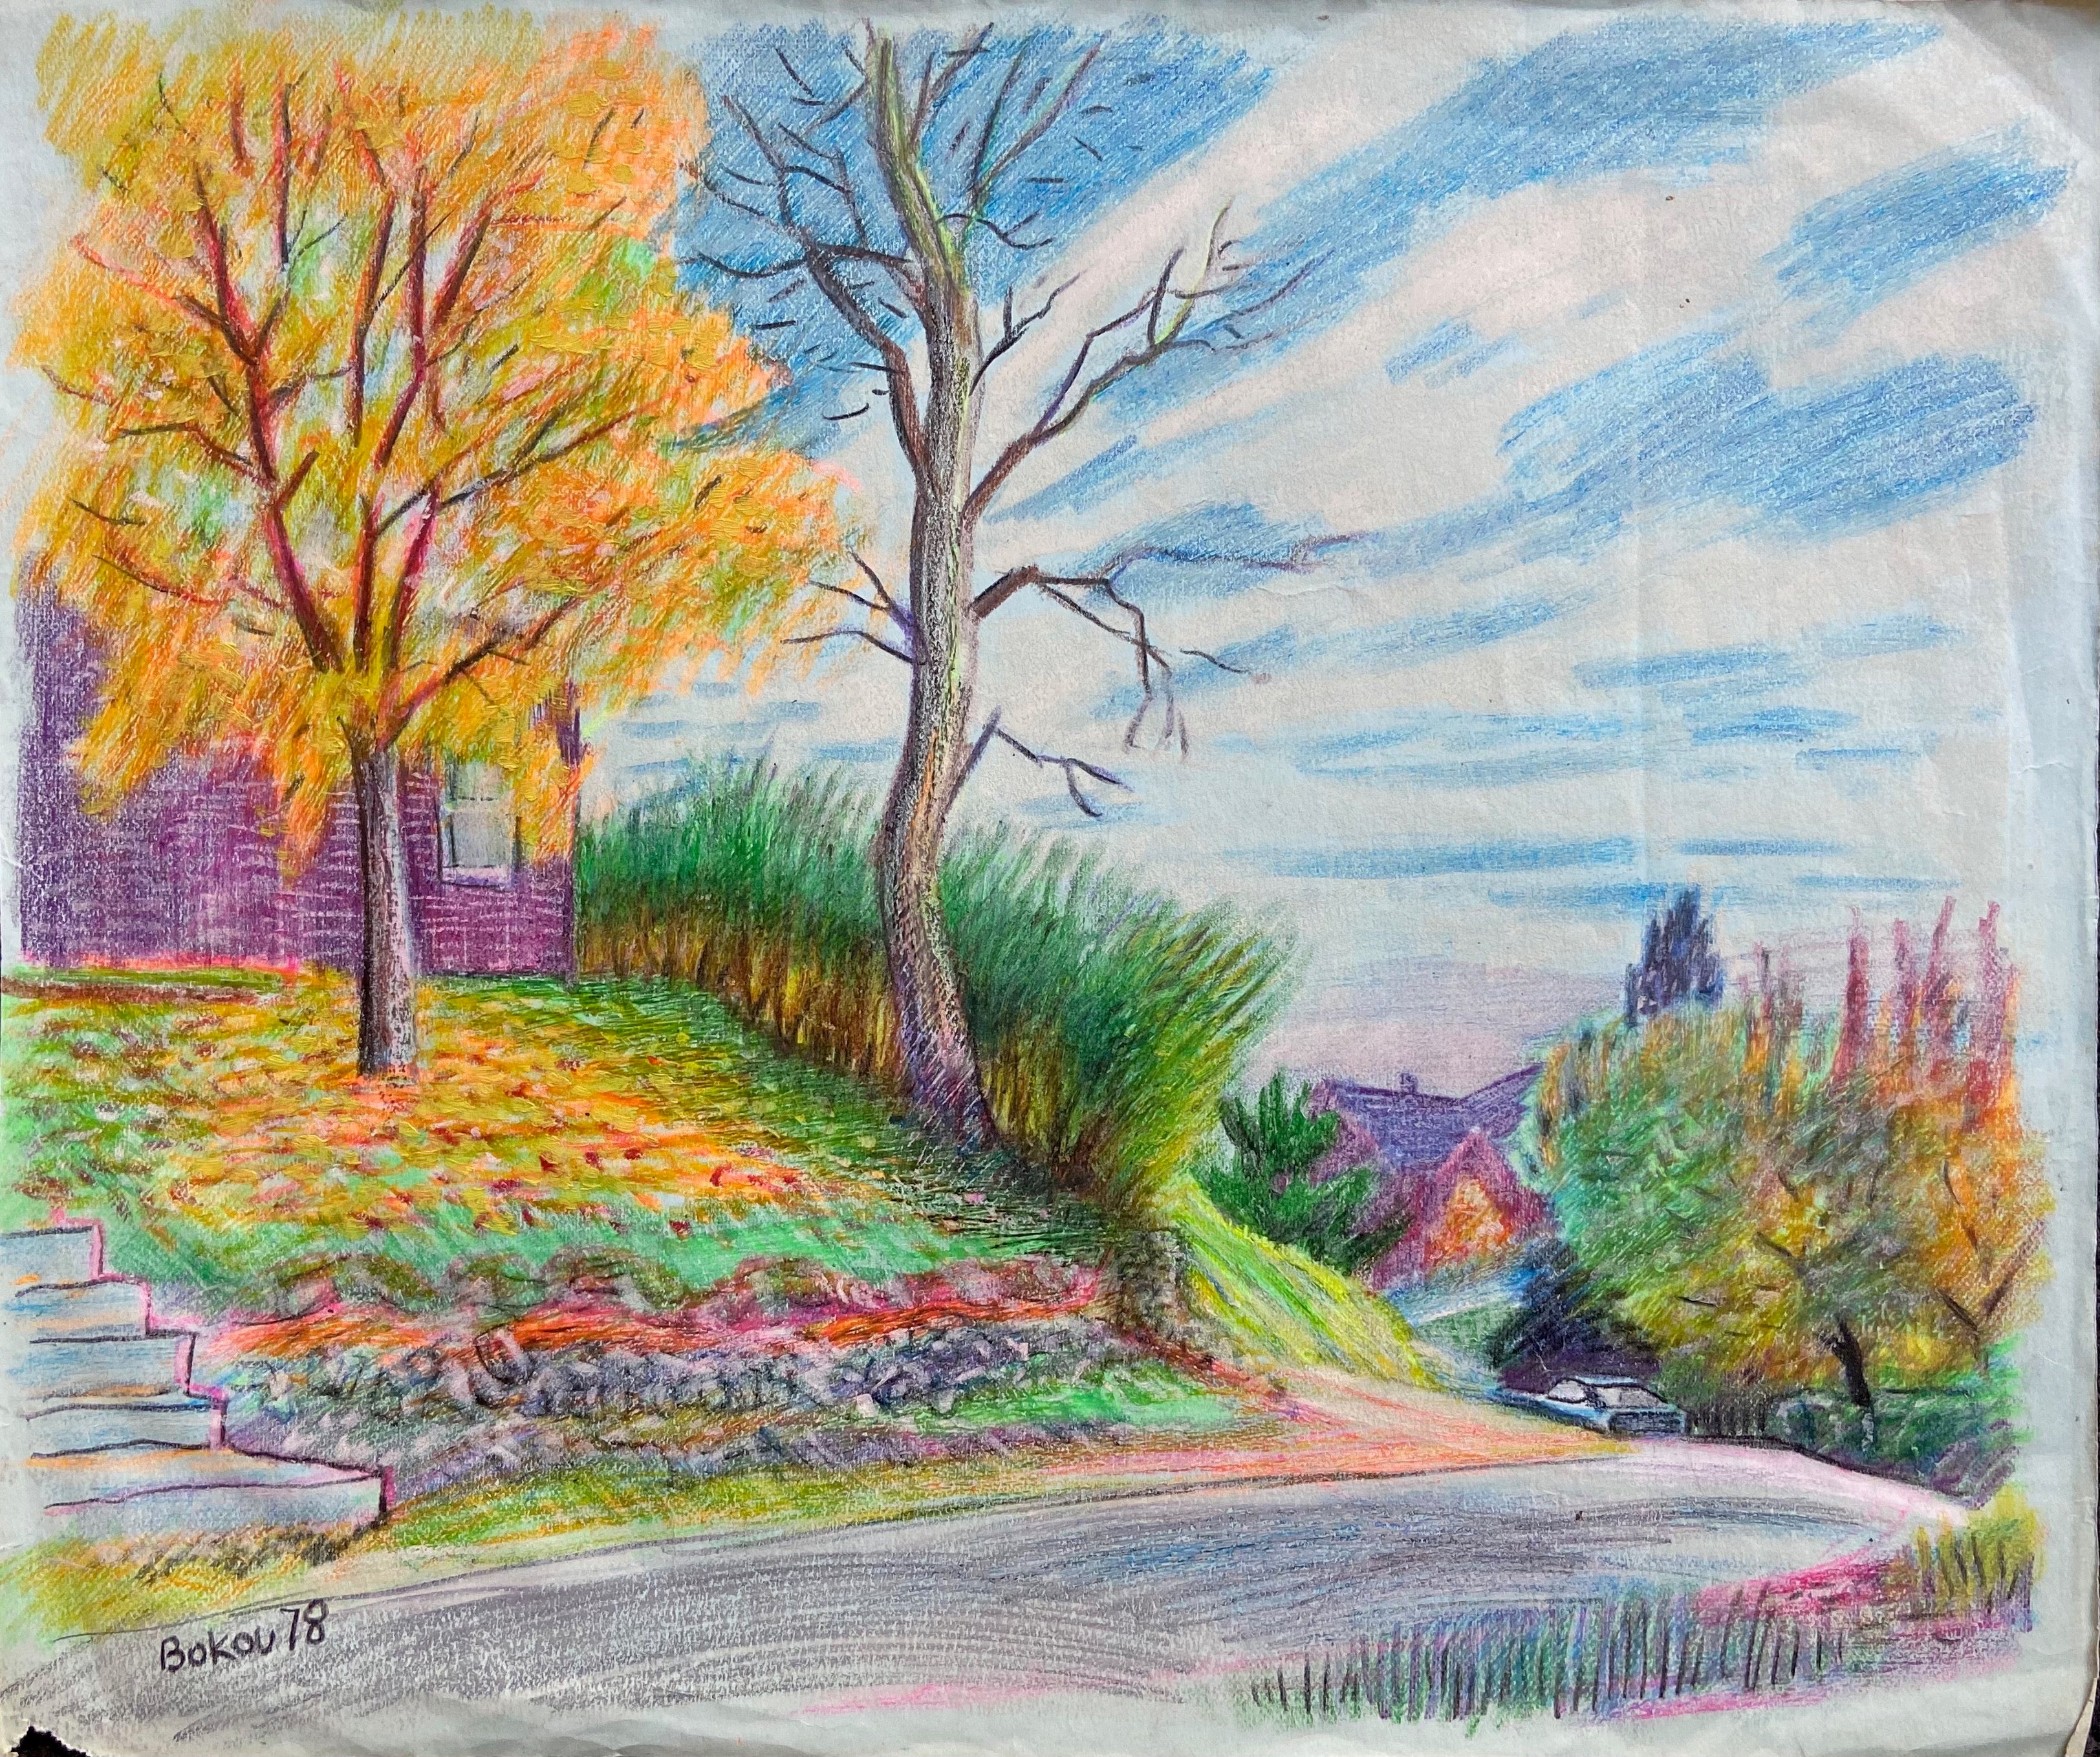 oil stick drawing of a suburban street